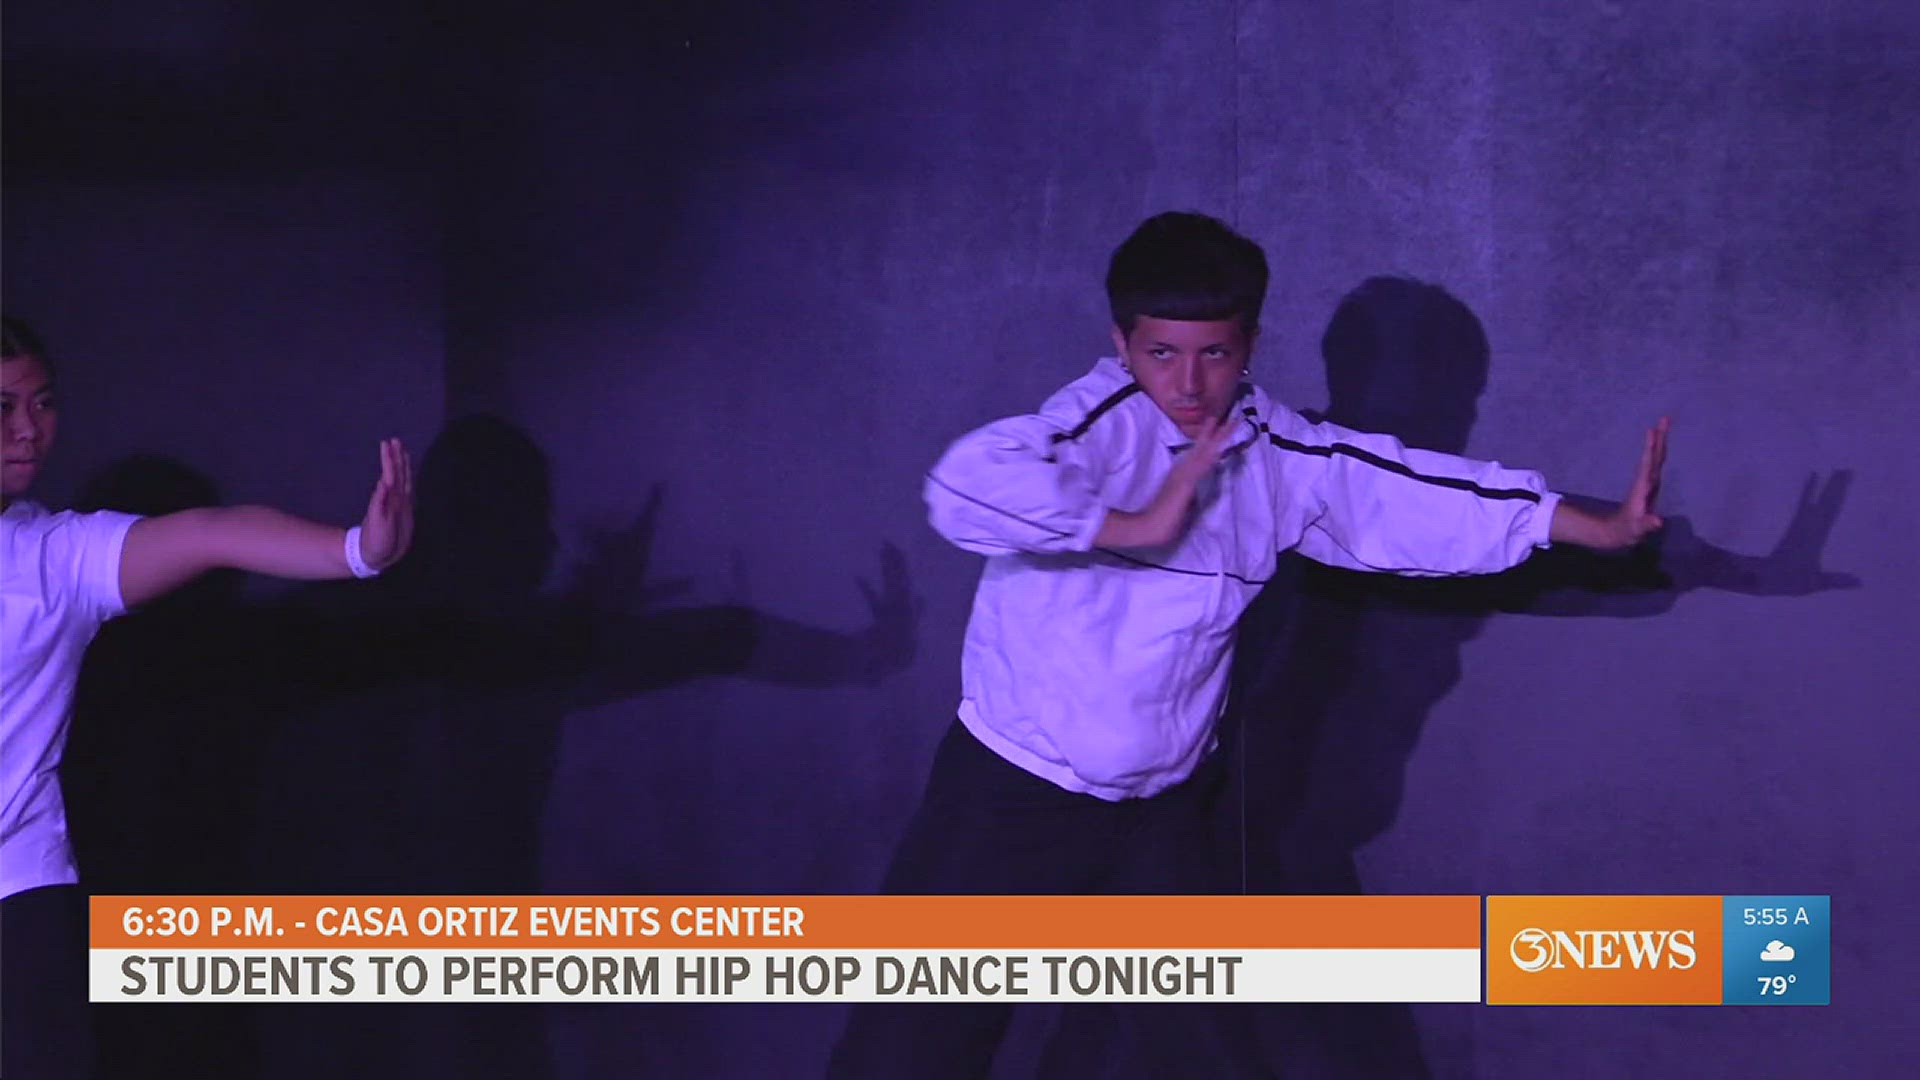 Students are set to perform their hip hop dance Thursday night at the Casa Ortiz Events Center at 6:30 p.m.